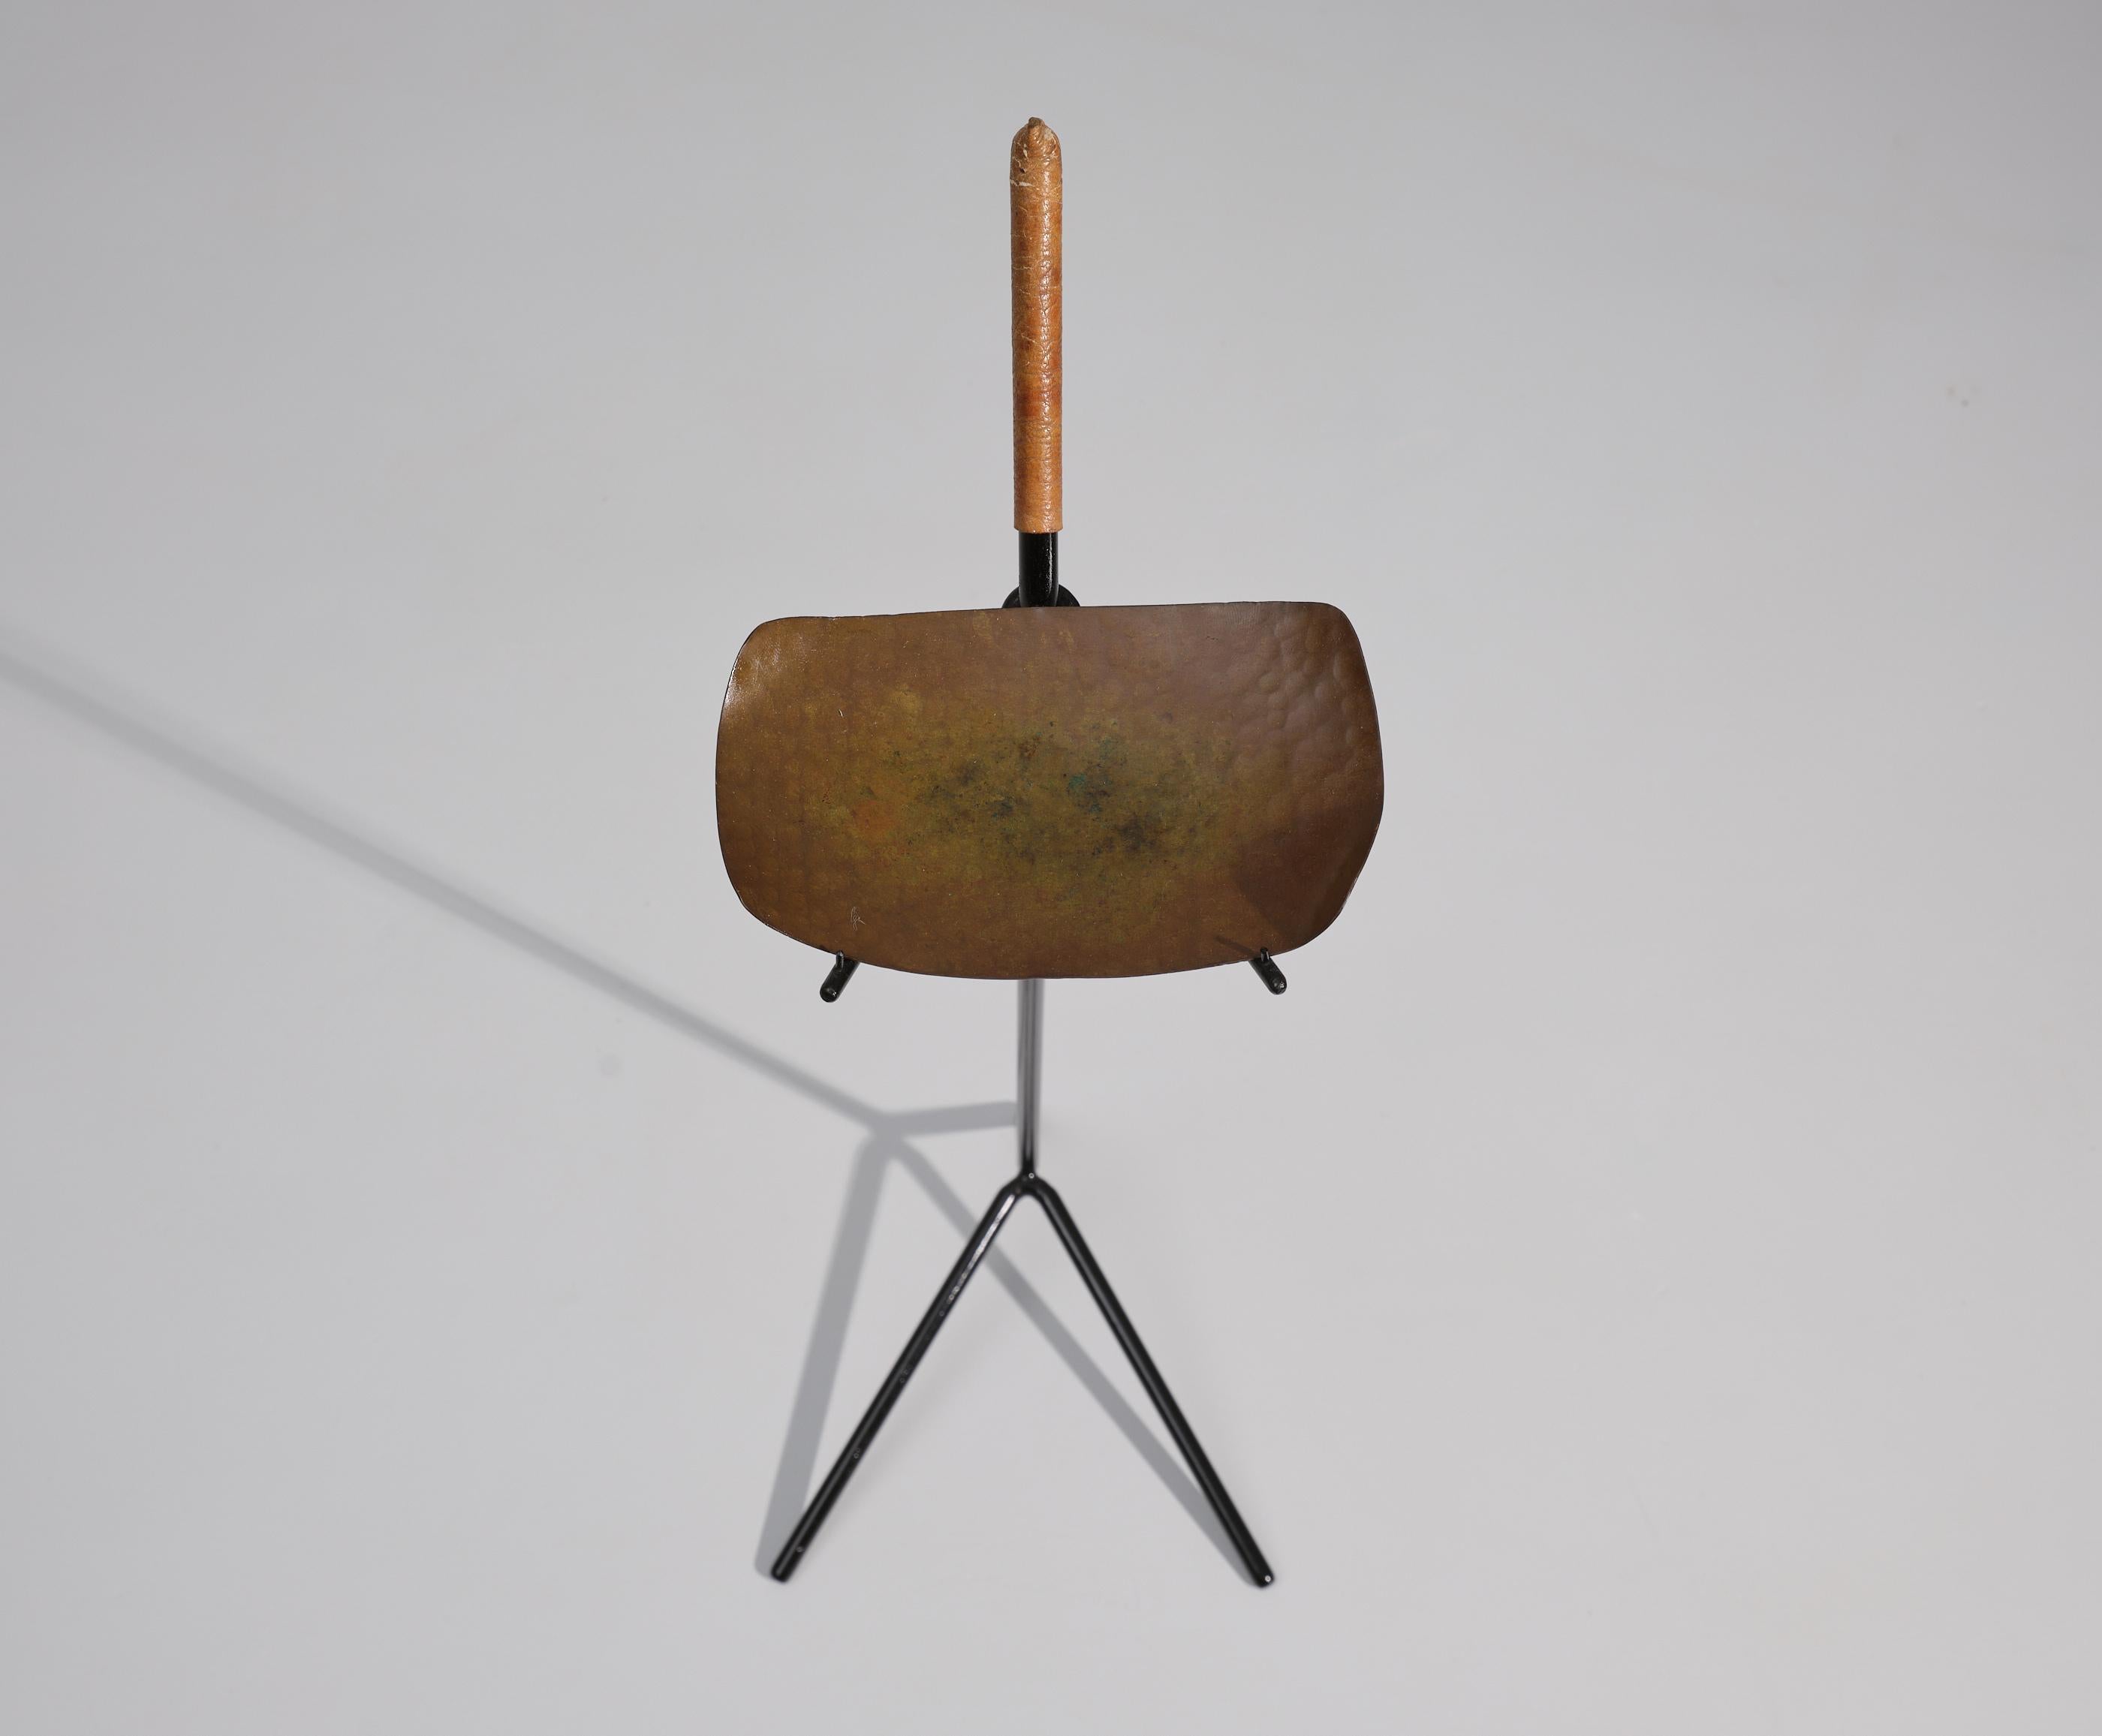 Midcentury Italian Brass, Iron and Leather Ashtray Stand or Poked Emptier  , 195 2